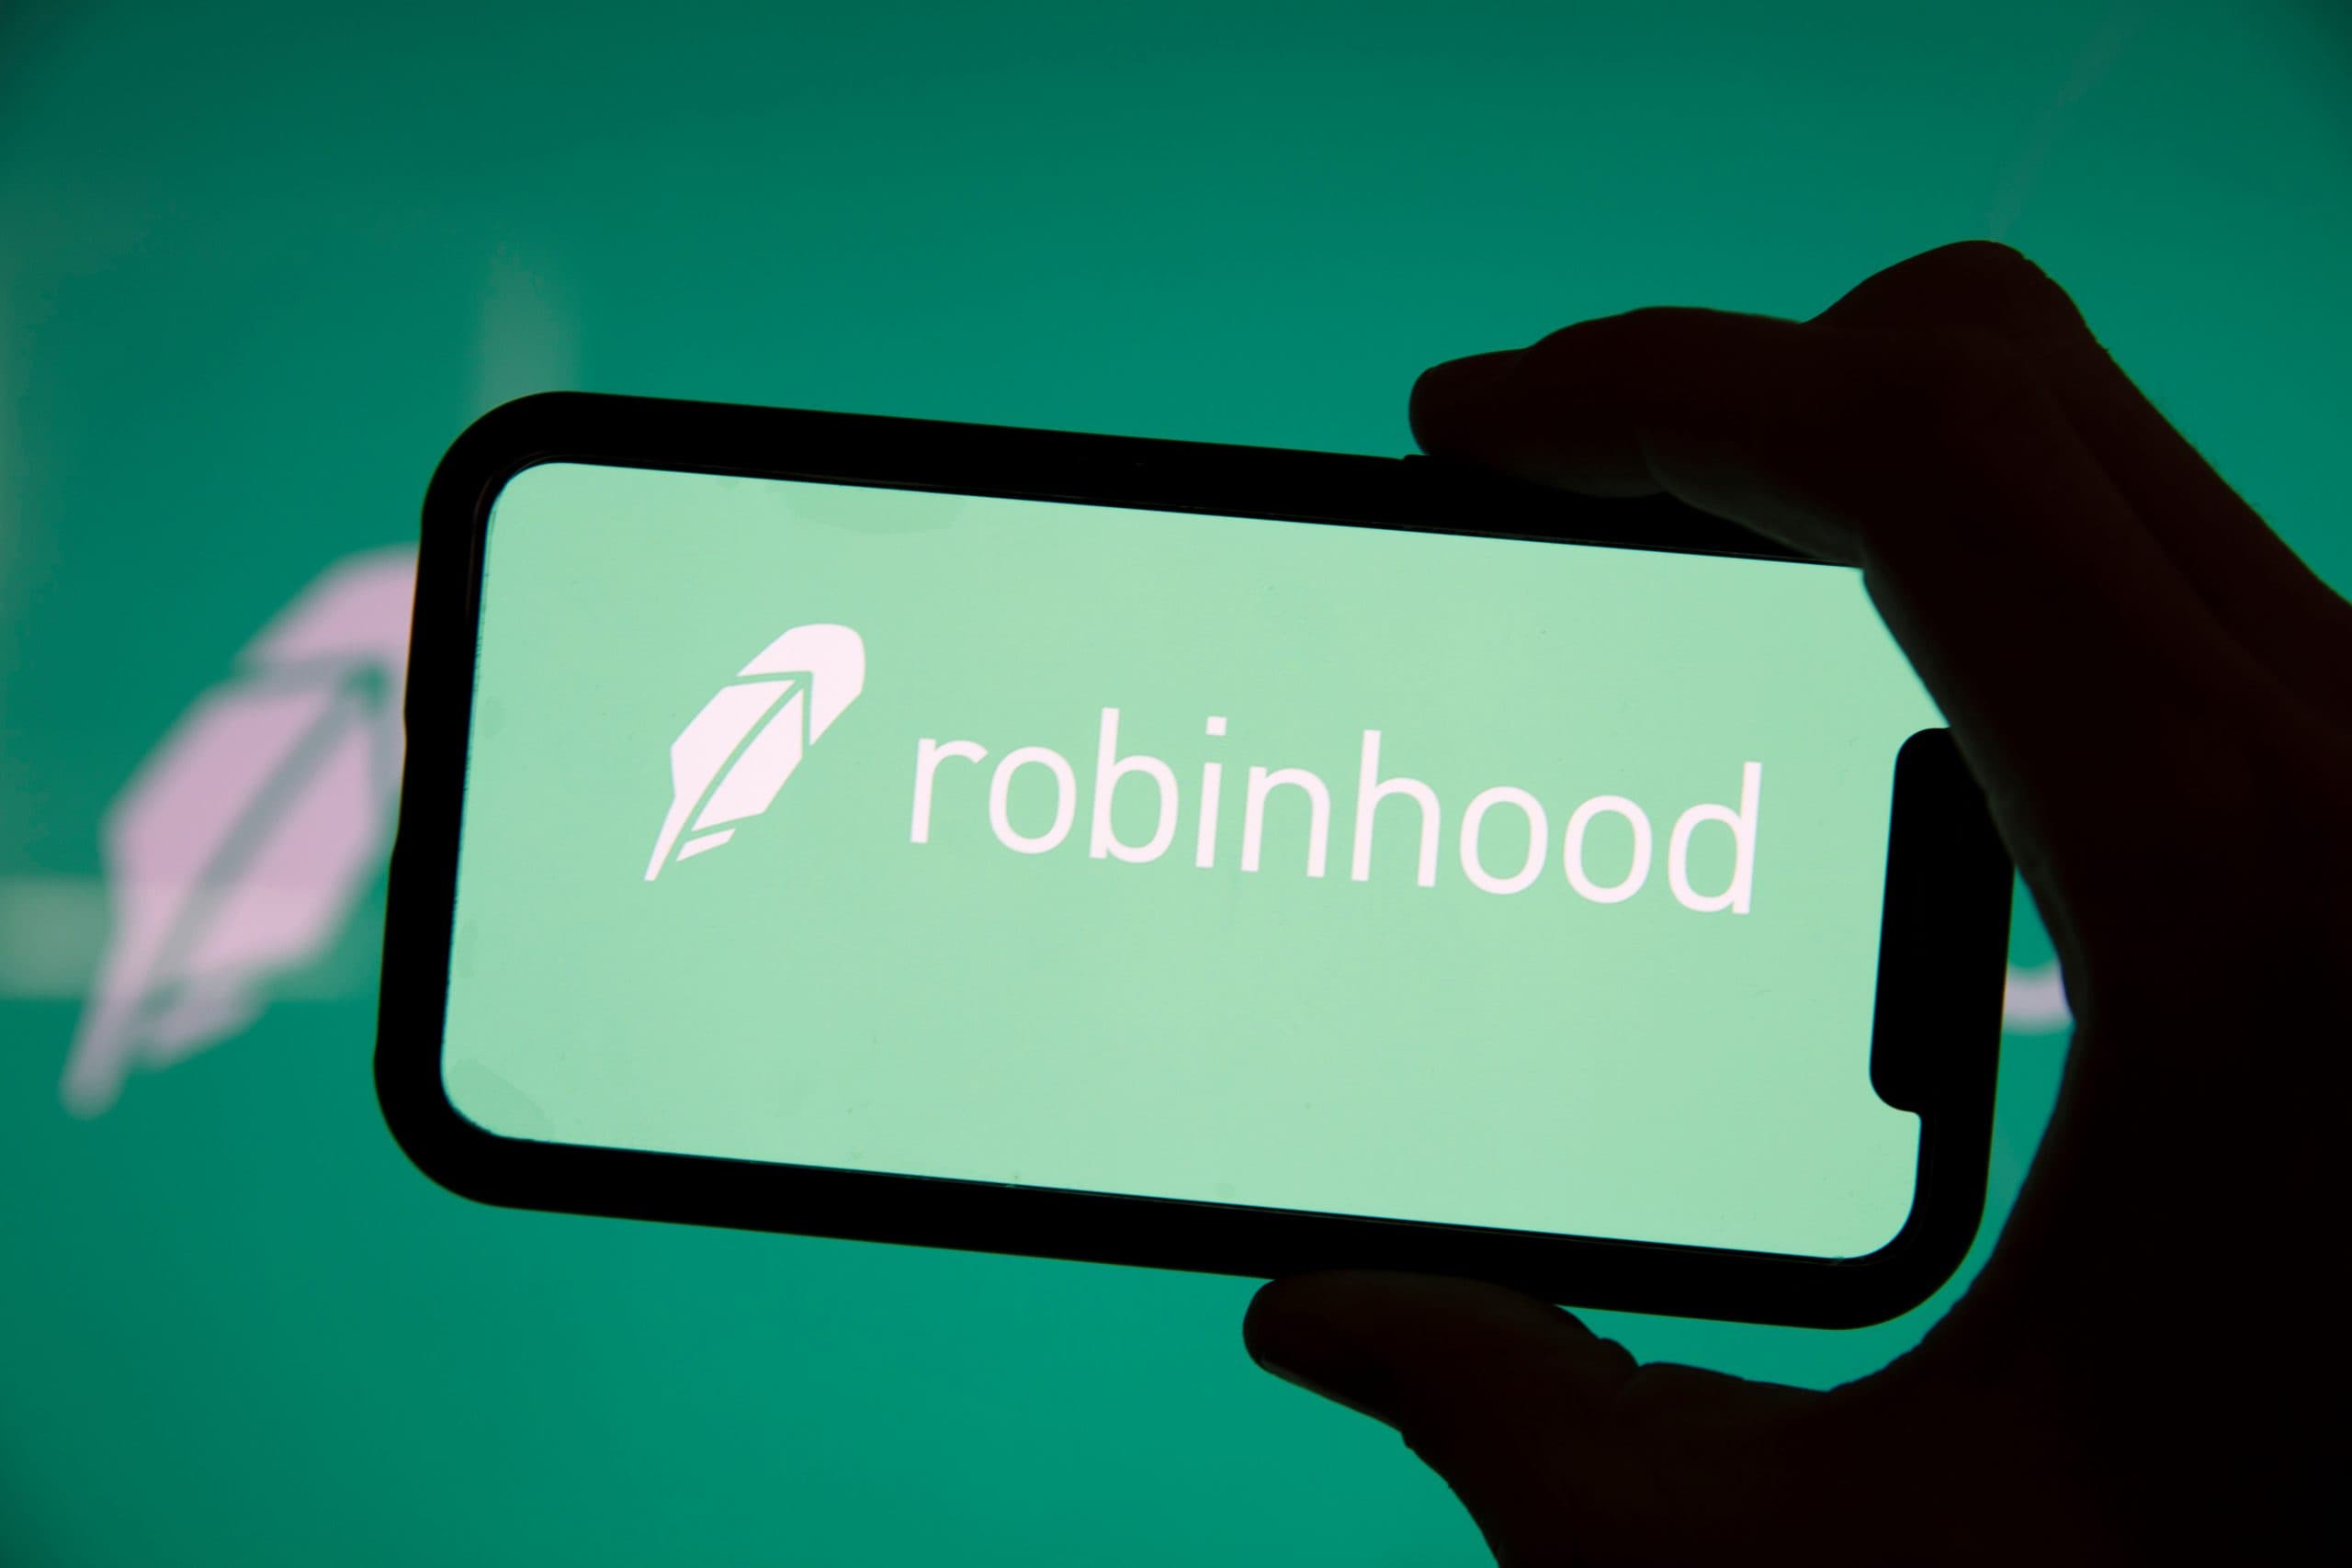 RobinHood: from October there will be a new crypto wallet feature